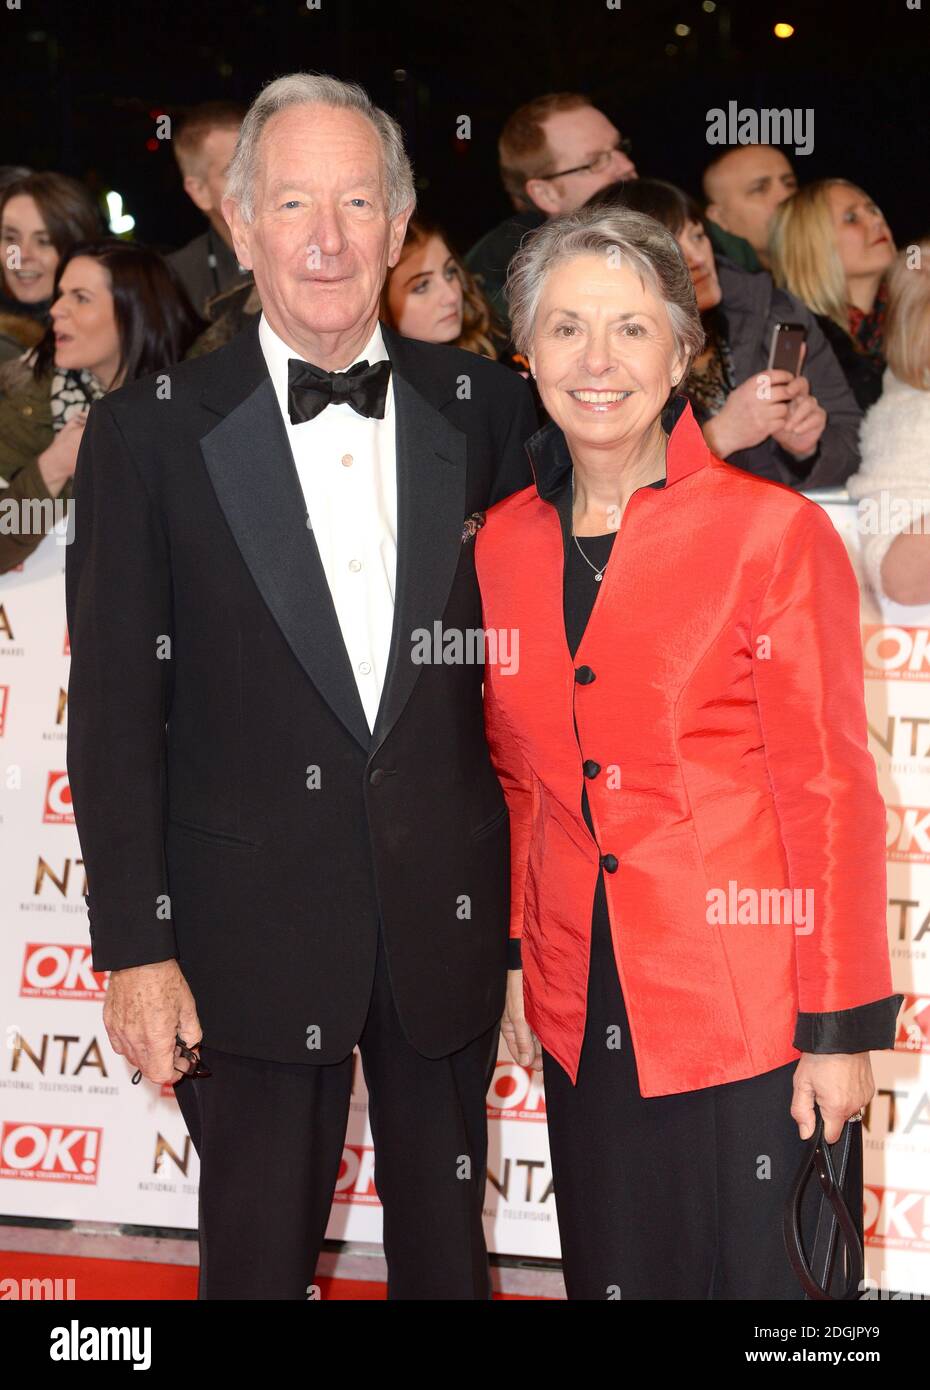 Michael Buerk and wife Christine on the red carpet at the National Television Awards 2015 held at the O2 Arena, London.  This year the NTA's are celebrating their 20th year. Stock Photo